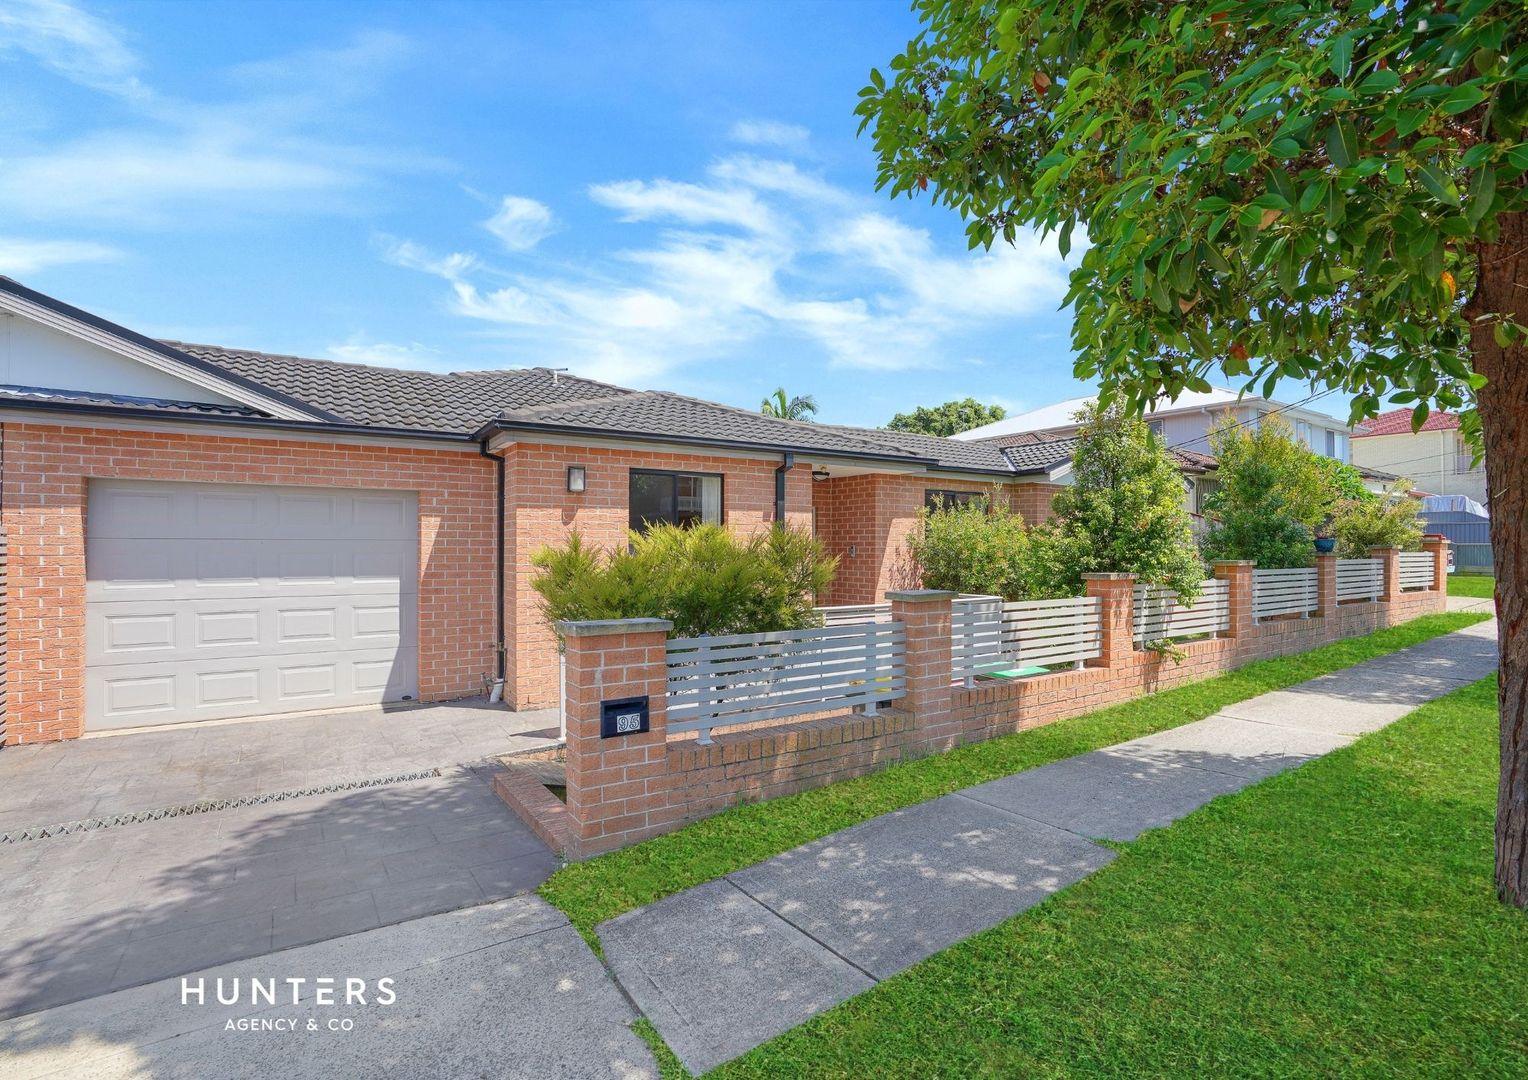 95 Princes Street, Guildford West NSW 2161